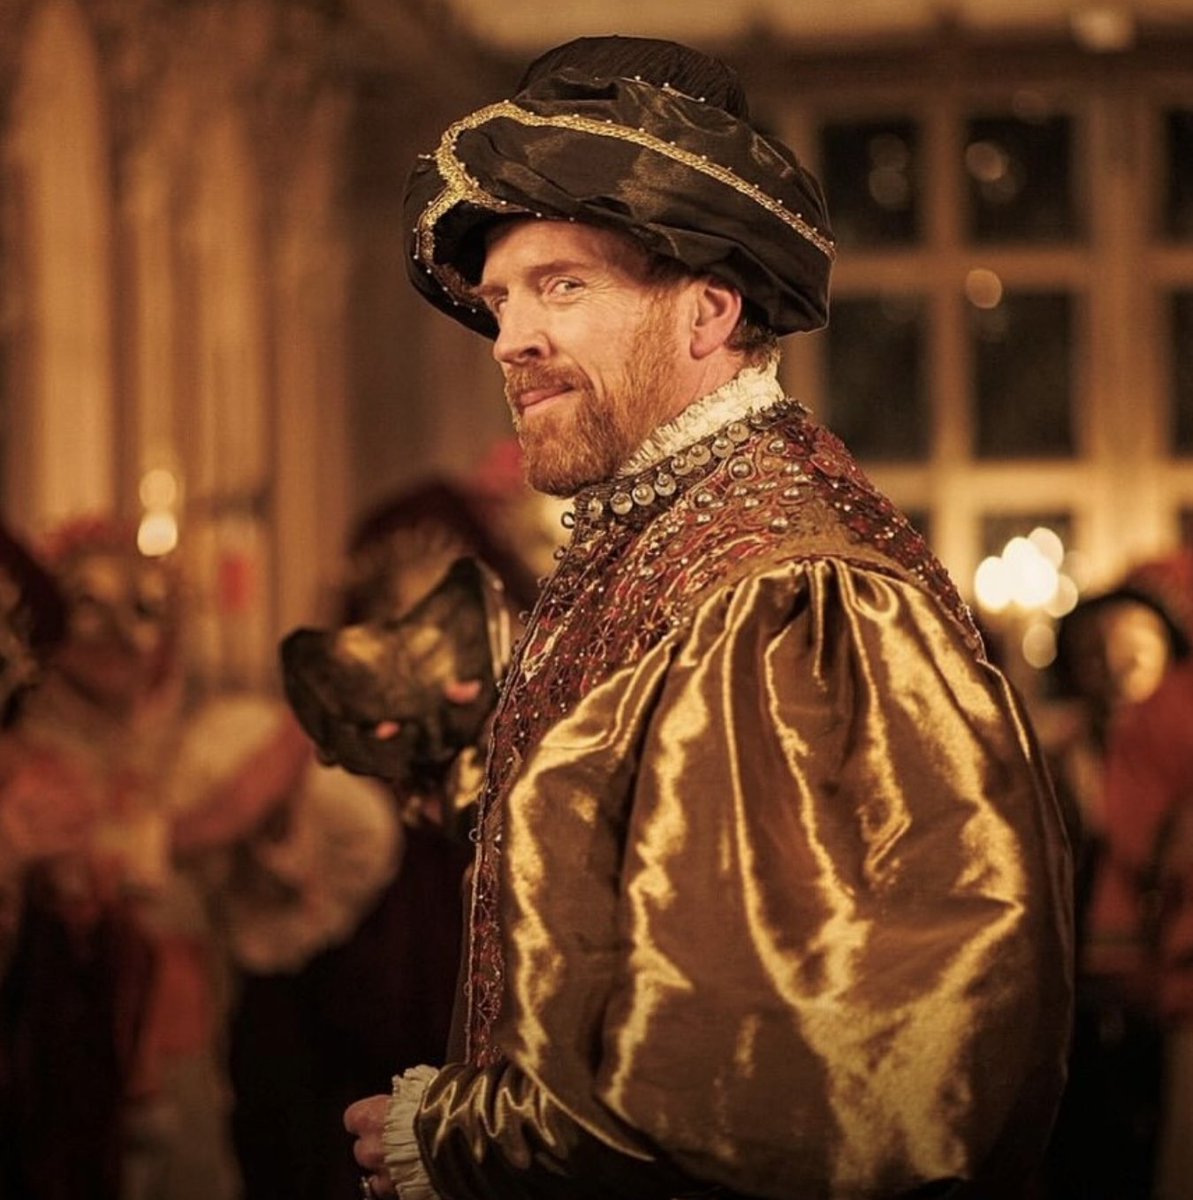 THOSE CRAZY EYES! Here's the first look photo of #DamianLewis as #HenryVIII in #HilaryMantel's #TheMirrorAndTheLight coming to BBC and PBS Masterpiece soon. See more first look photos here: damian-lewis.com/2024/04/03/534…